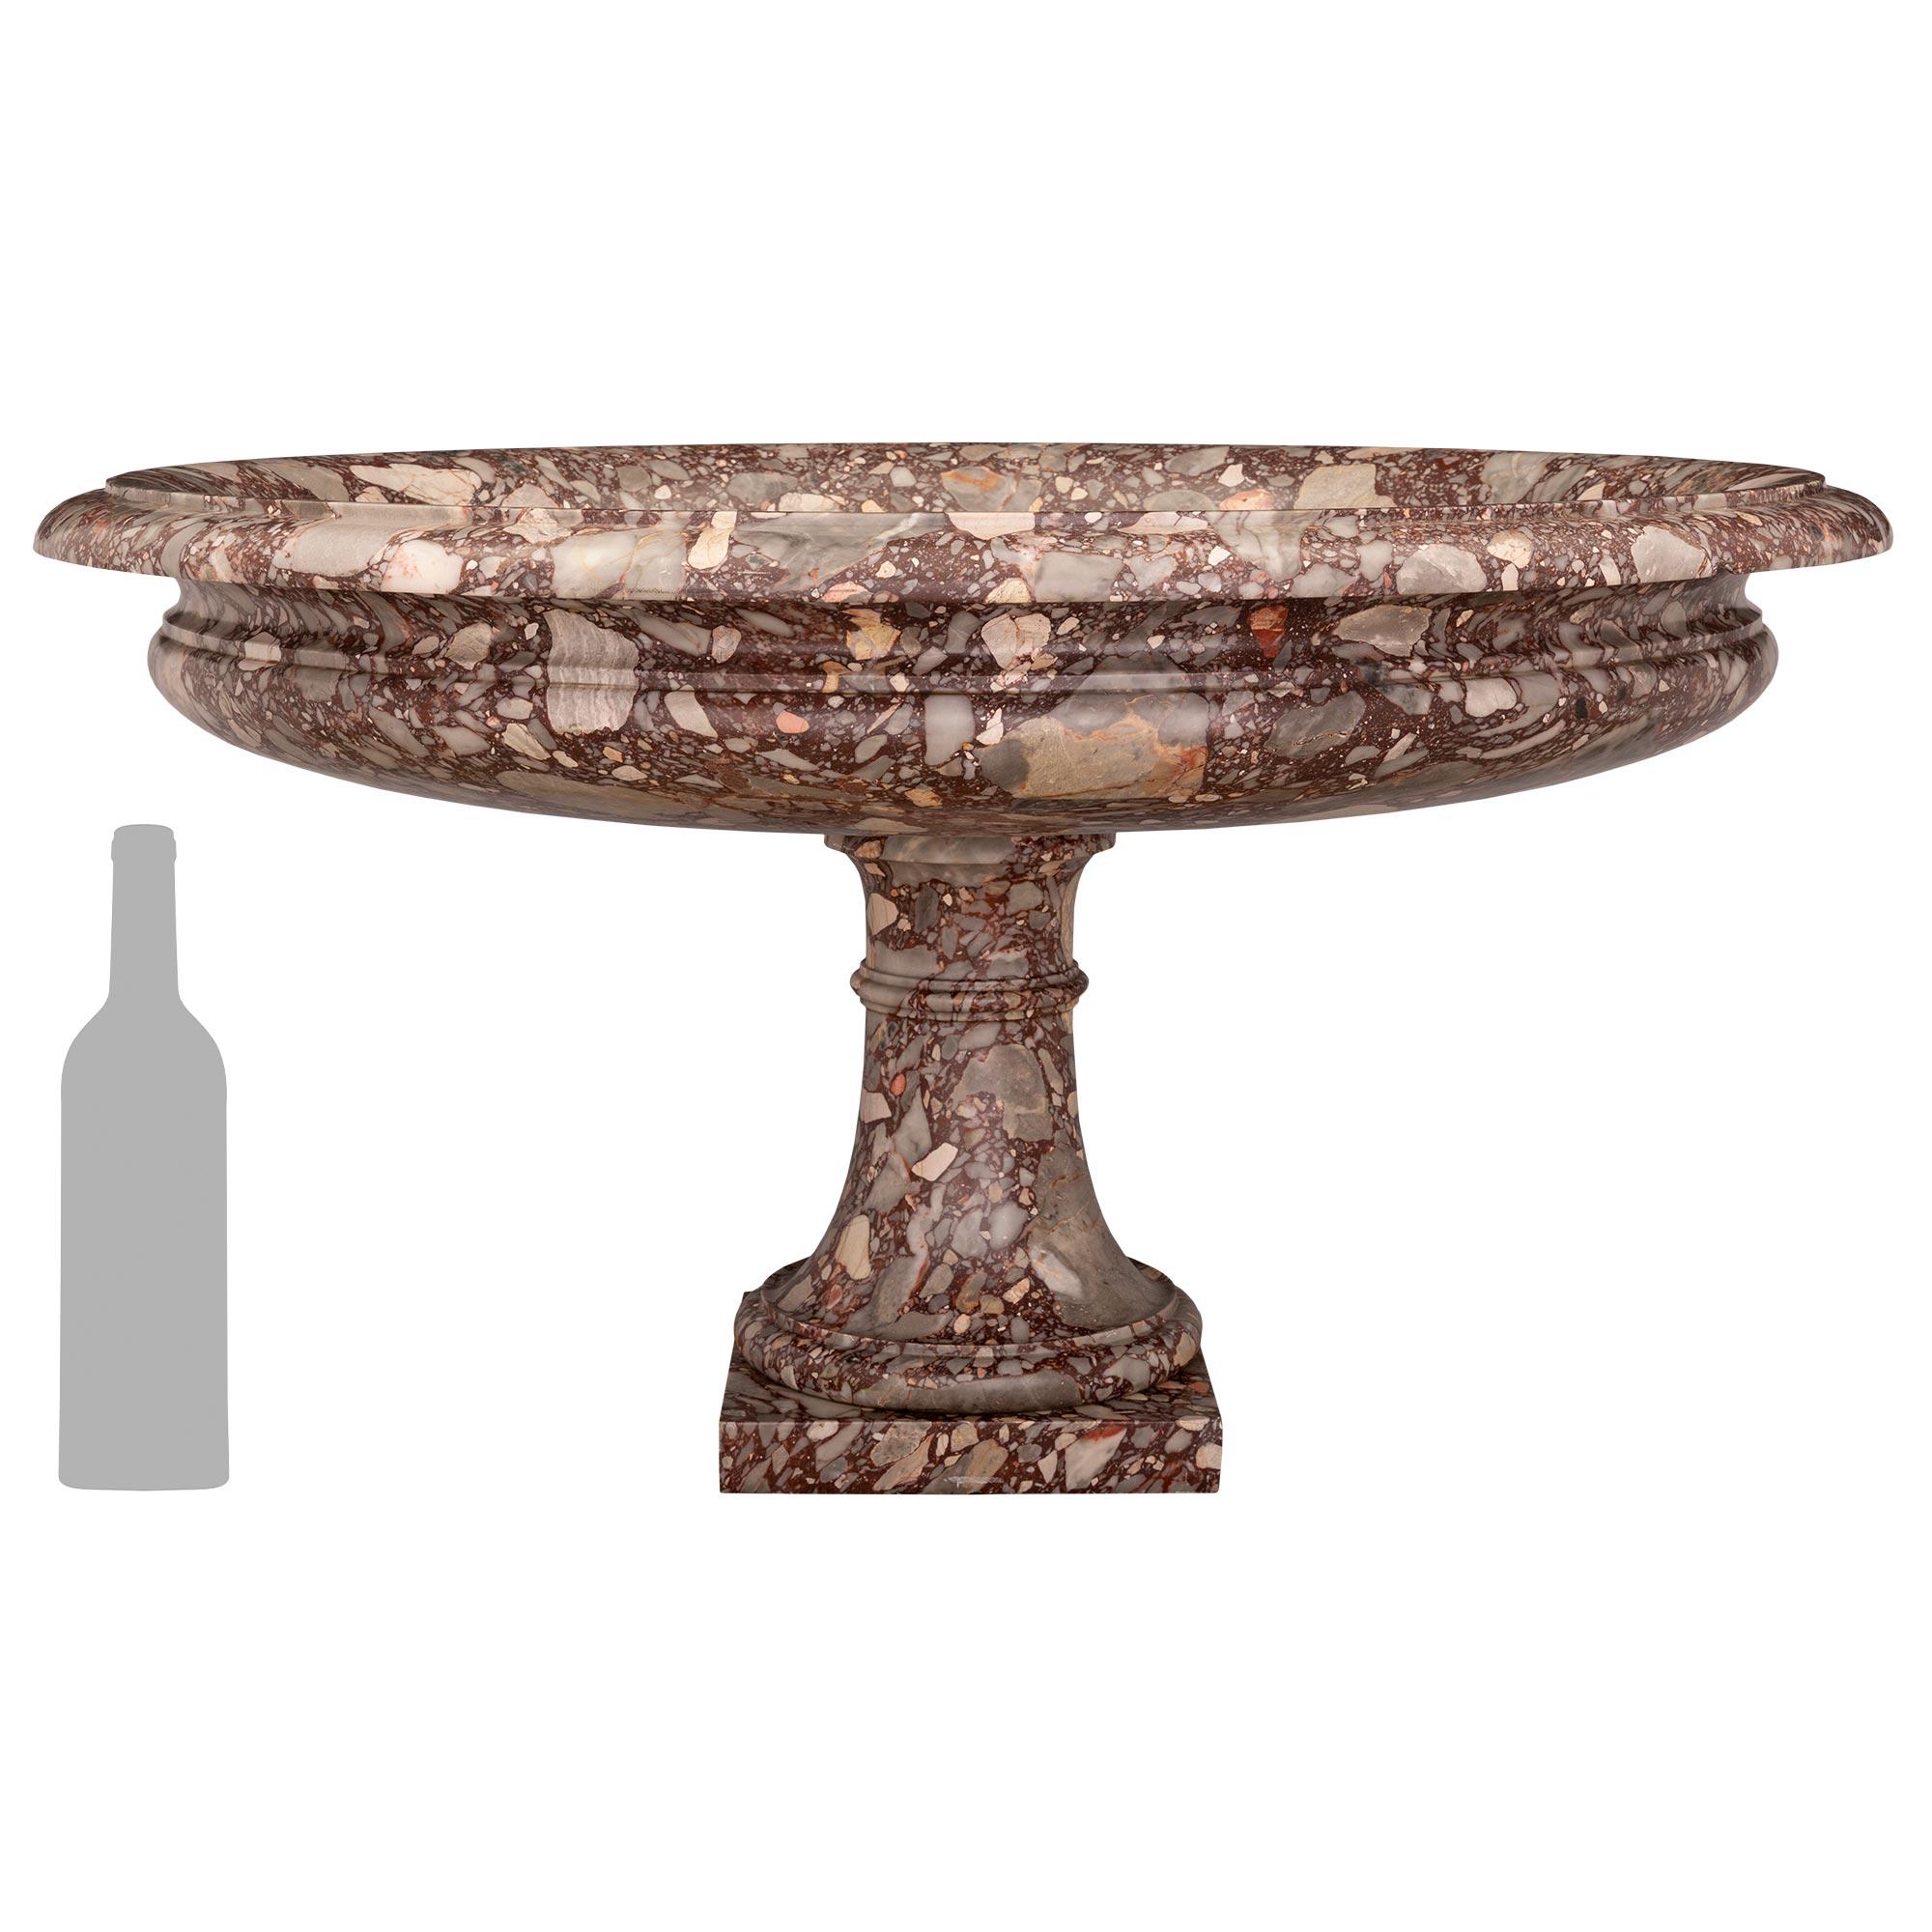 A stunning and most impressive Italian 19th century Neo-Classical st. Breccia de Bourgogne marble bird bath/urn. The striking urn is raised by a square base below the socle shape pedestal with an elegant wrap around mottled band. The beautiful large